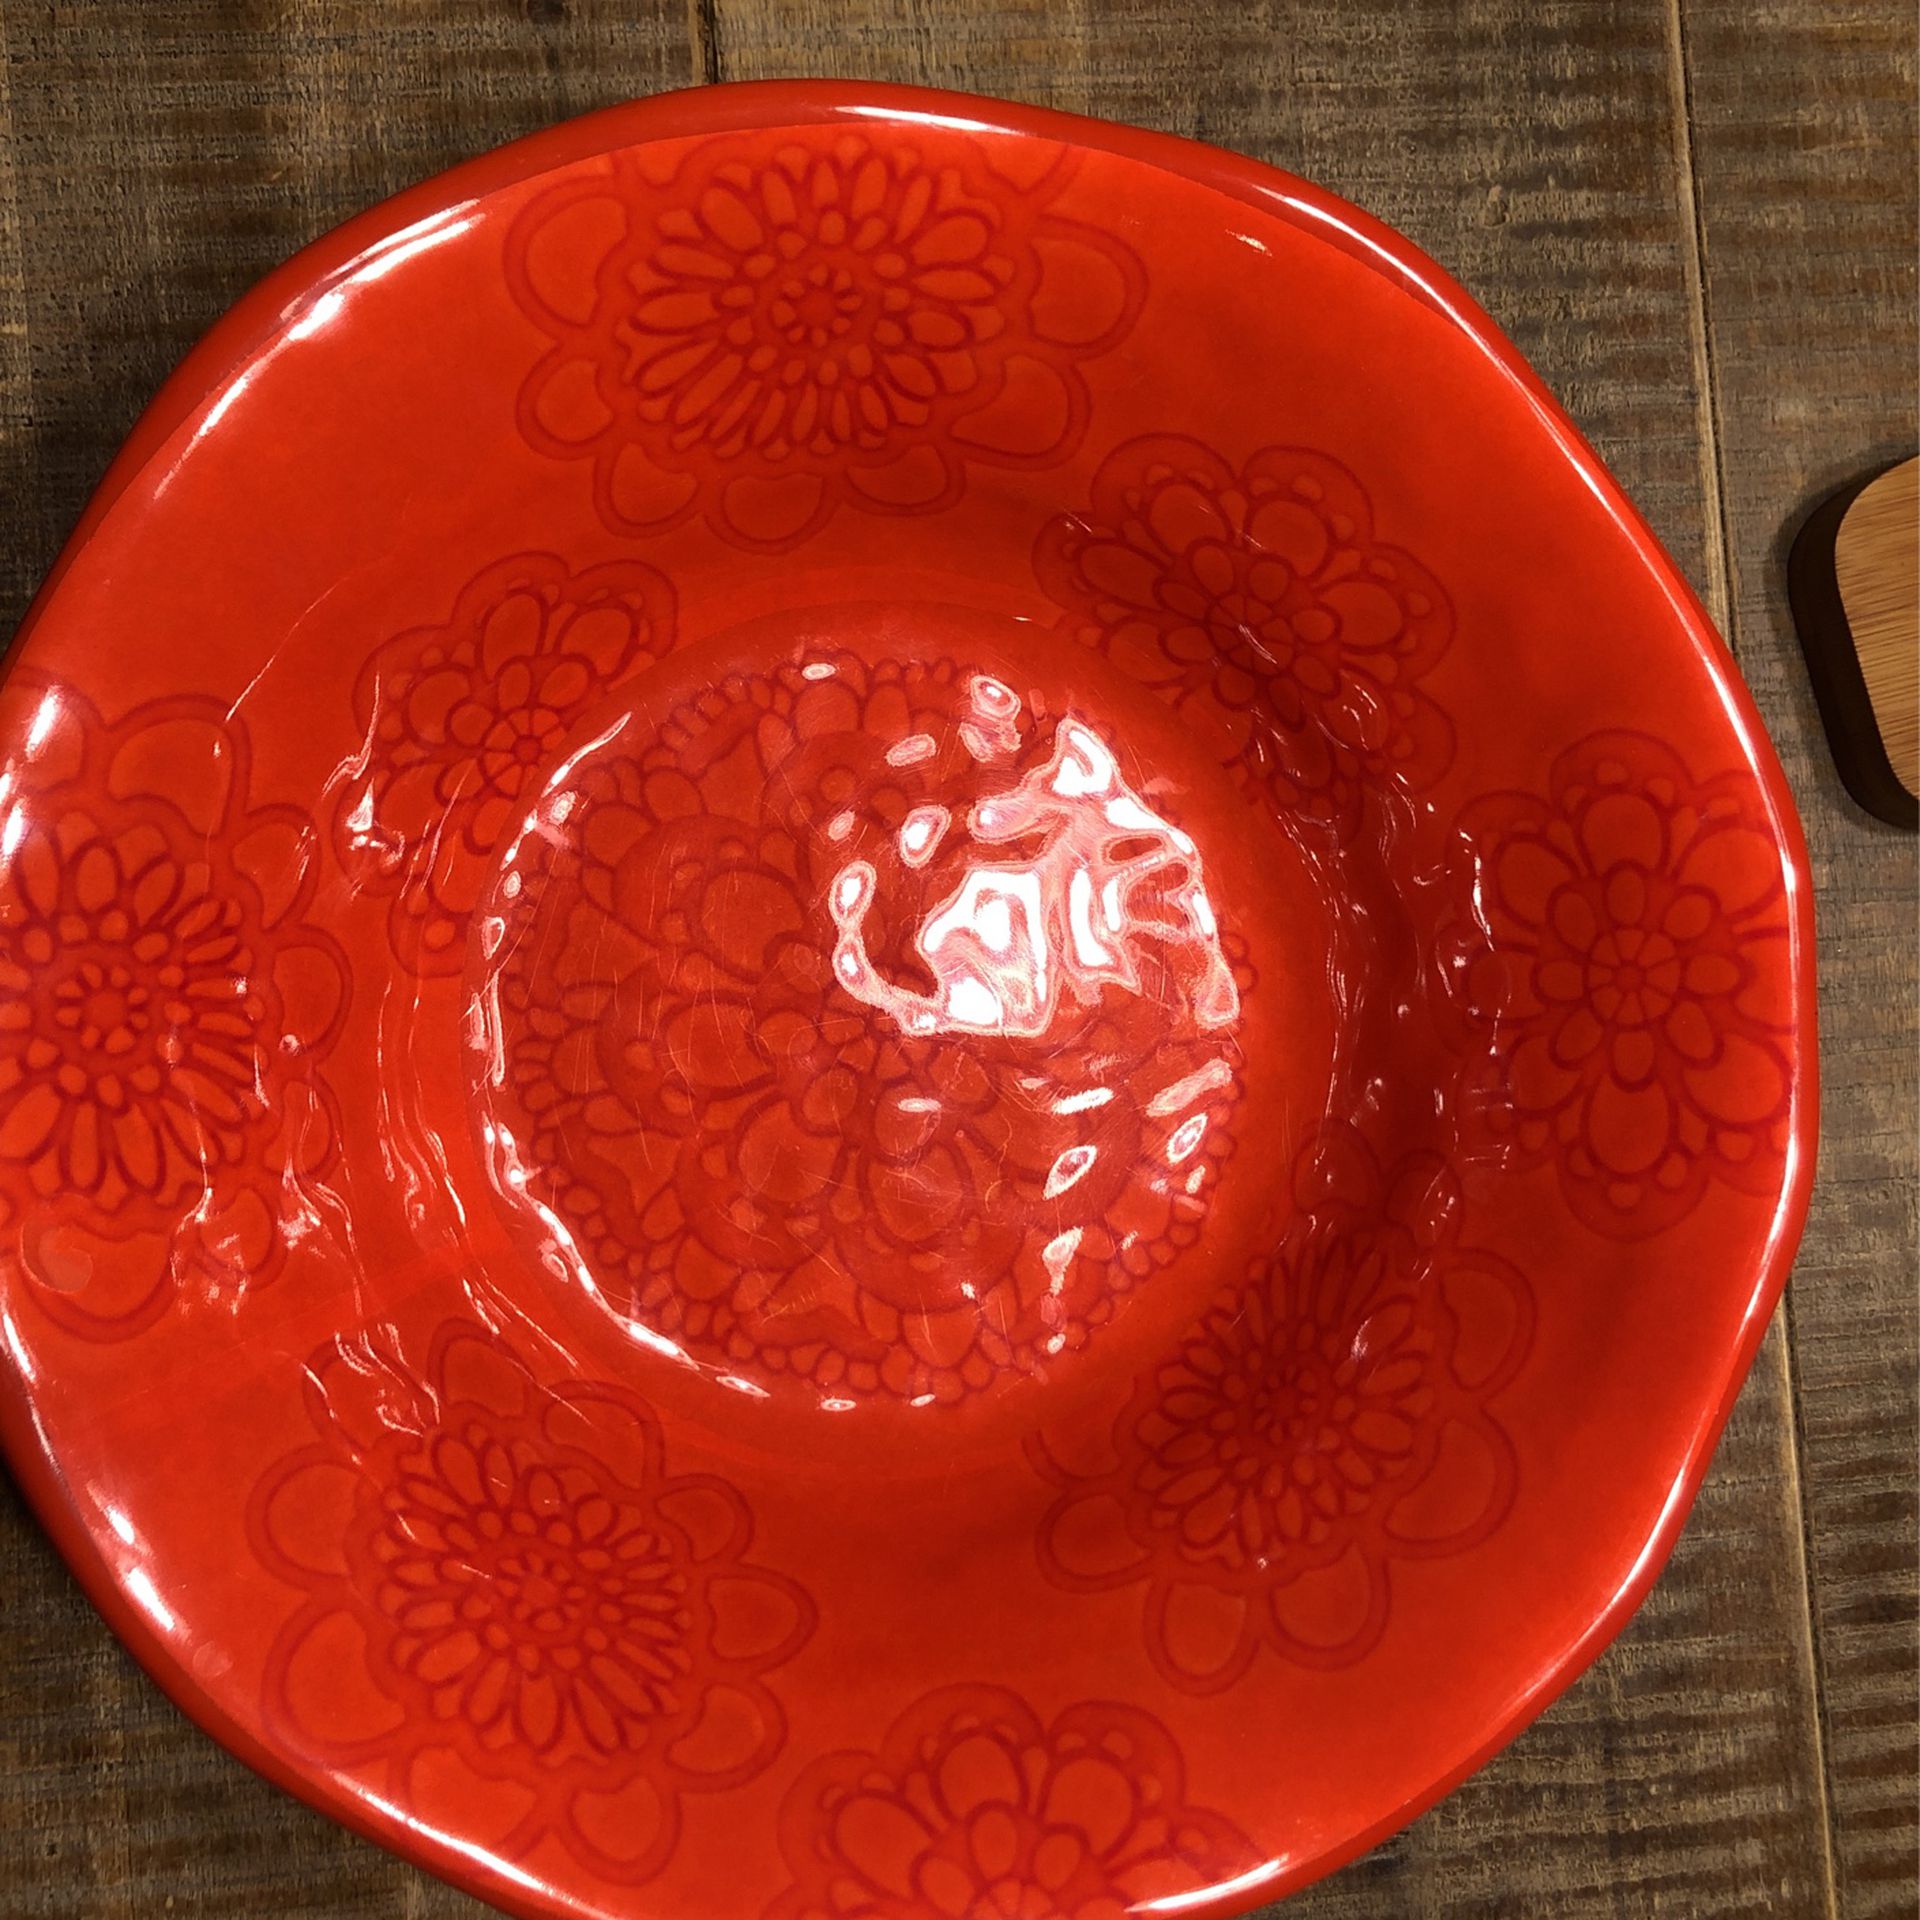 Wood Cutting Board and Red Salad Bowl with Tray